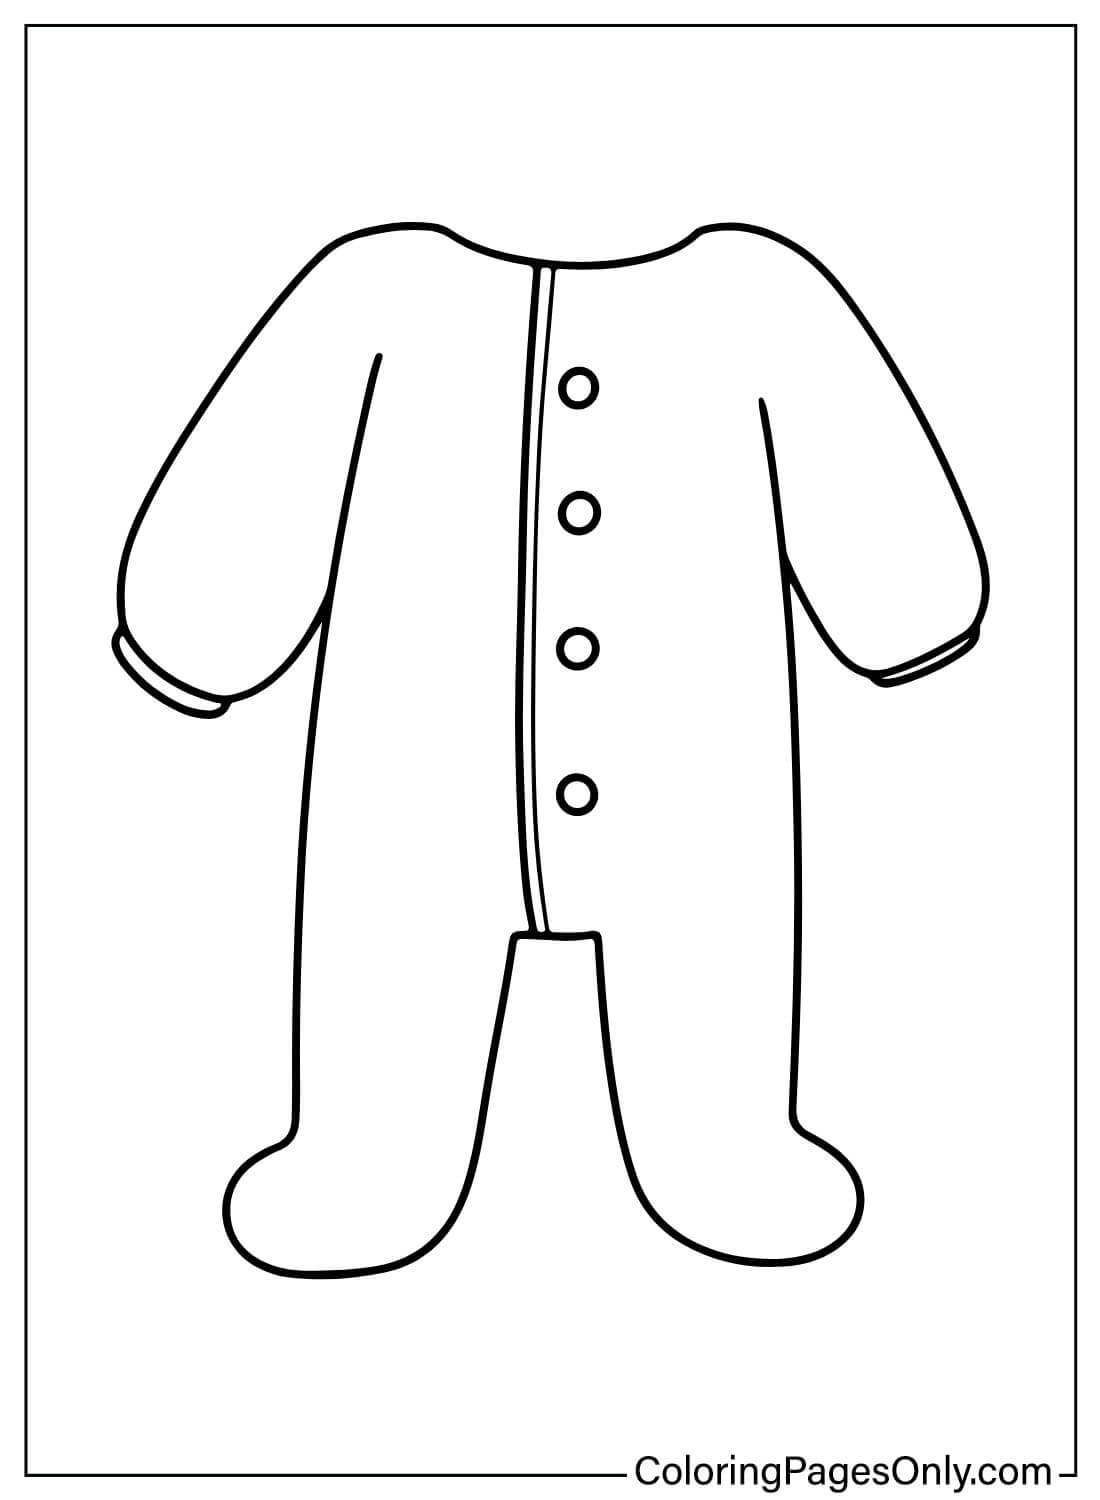 Coloring Pages Free Baby Clothes - Free Printable Coloring Pages